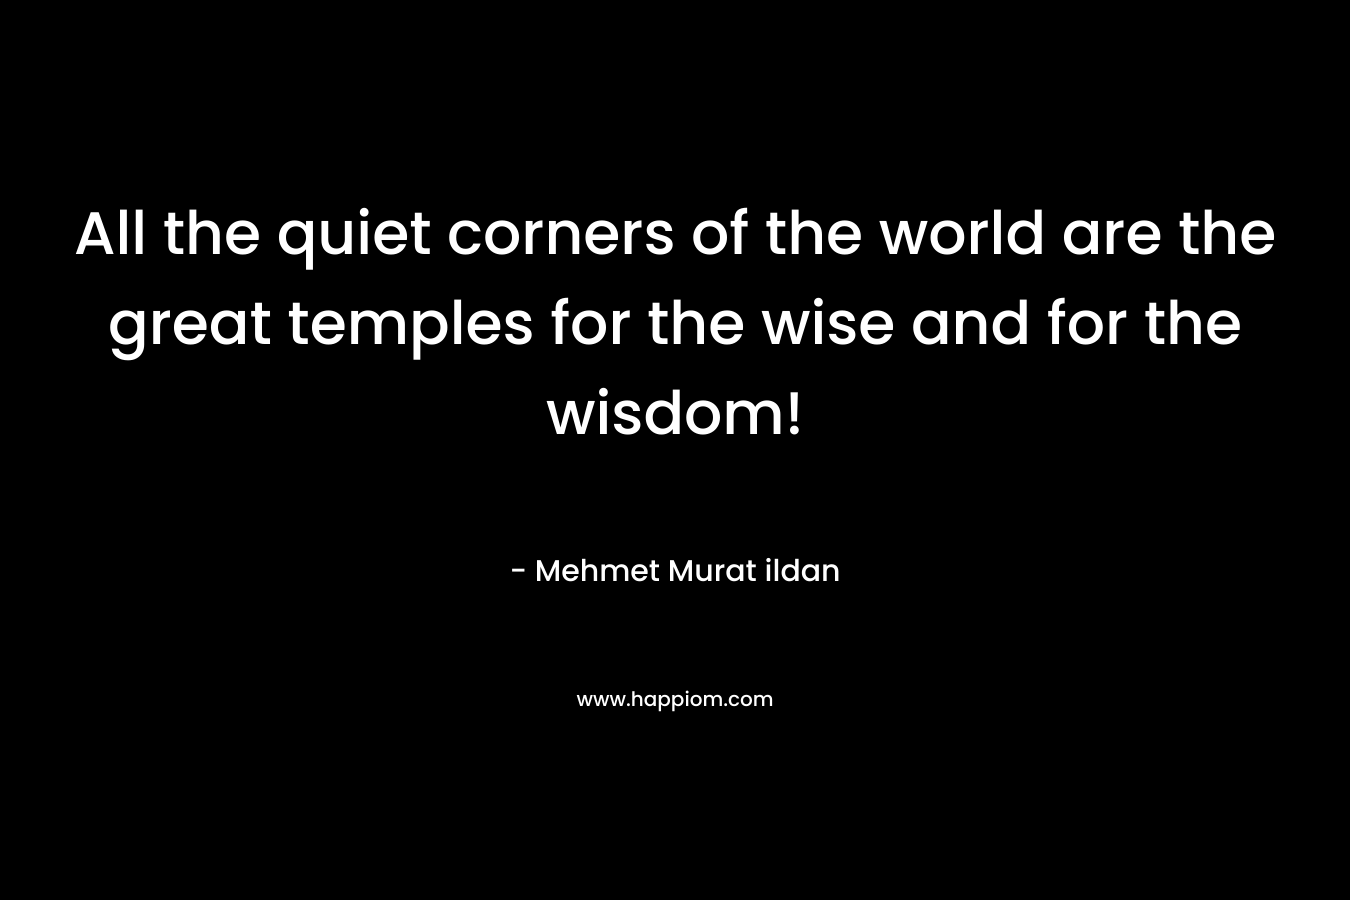 All the quiet corners of the world are the great temples for the wise and for the wisdom! – Mehmet Murat ildan